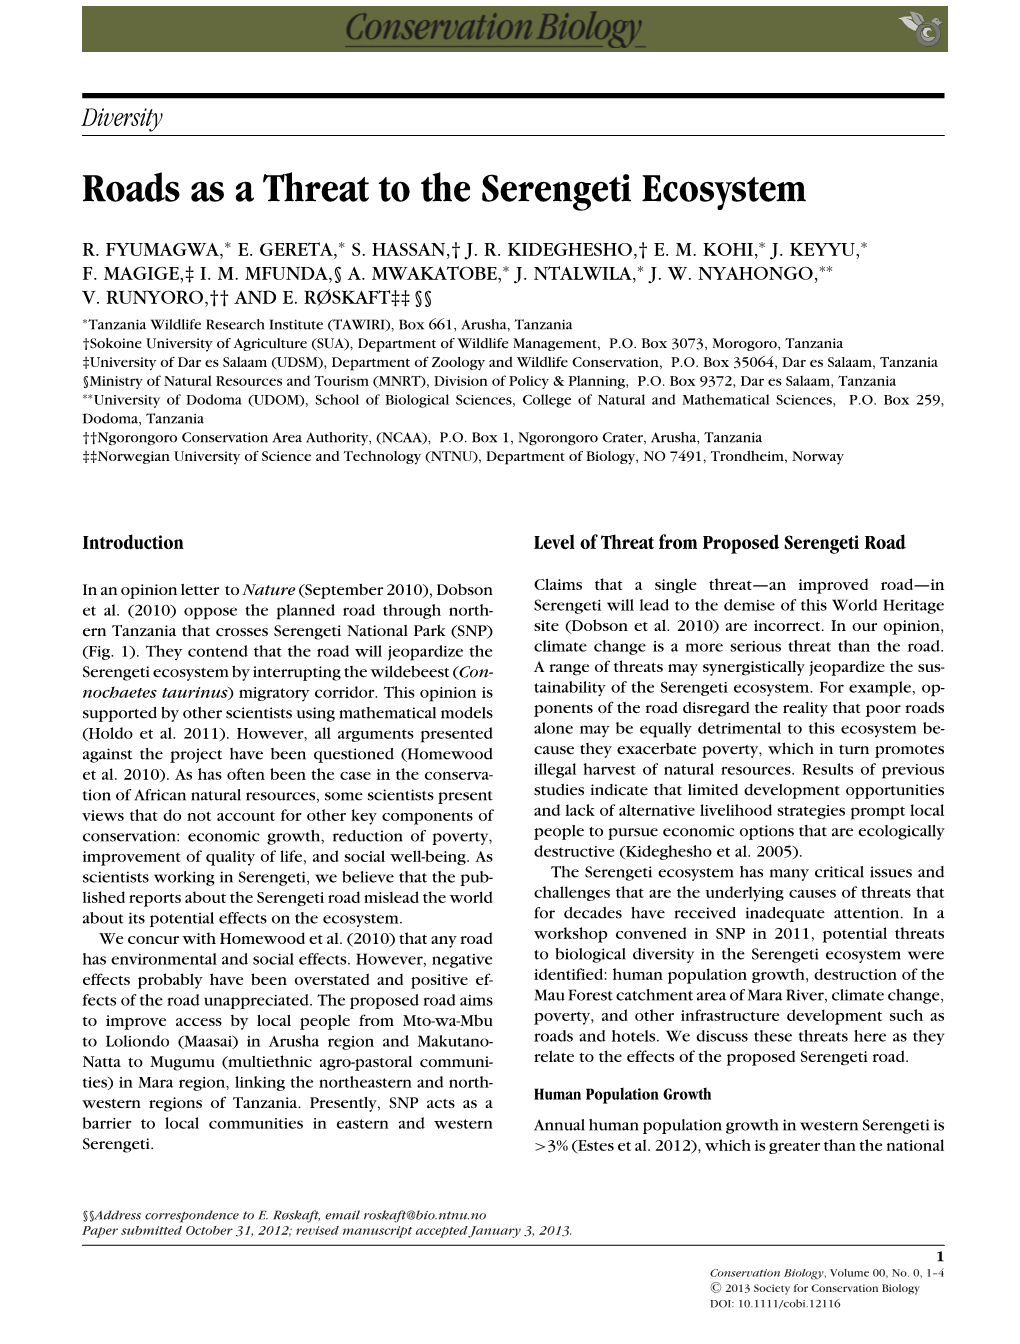 Roads As a Threat to the Serengeti Ecosystem